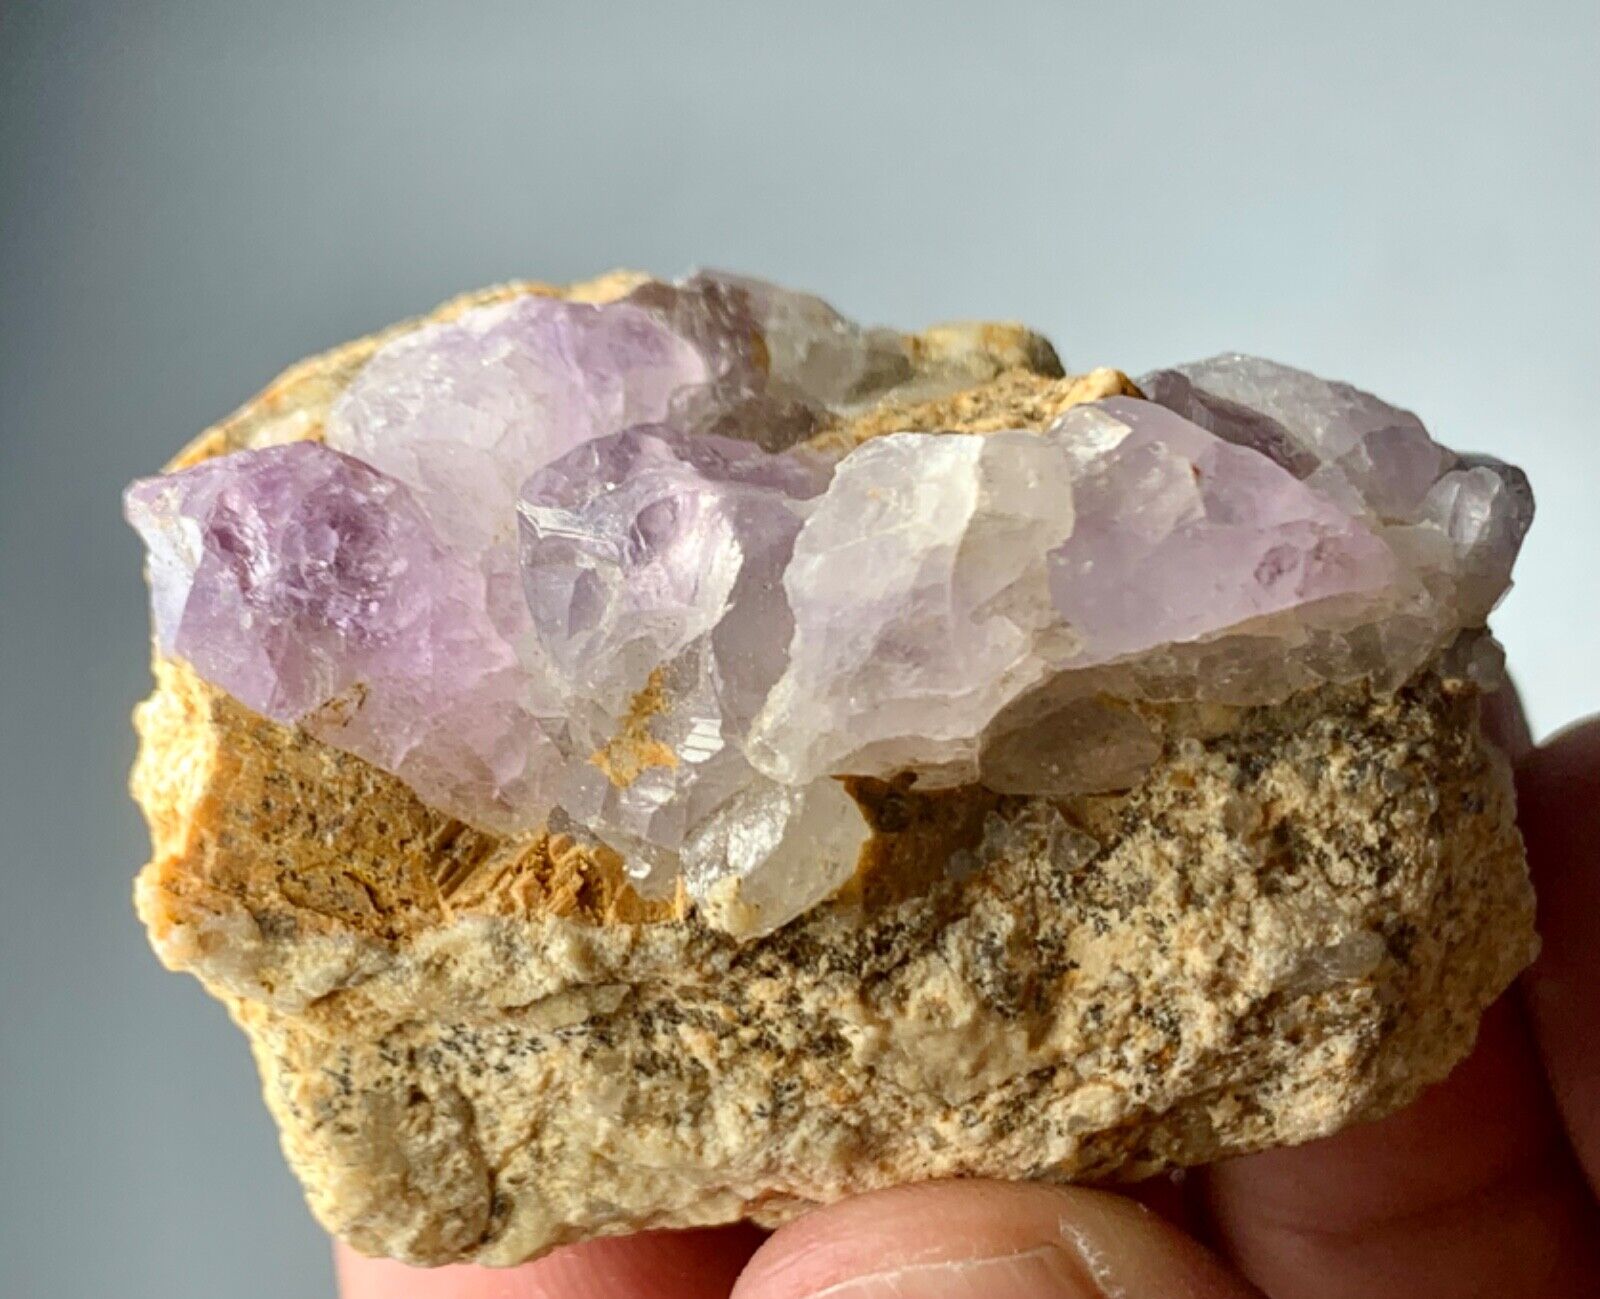 343 Cts Terminated Amethyst Crystal Bunch Specimen from Afghanistan